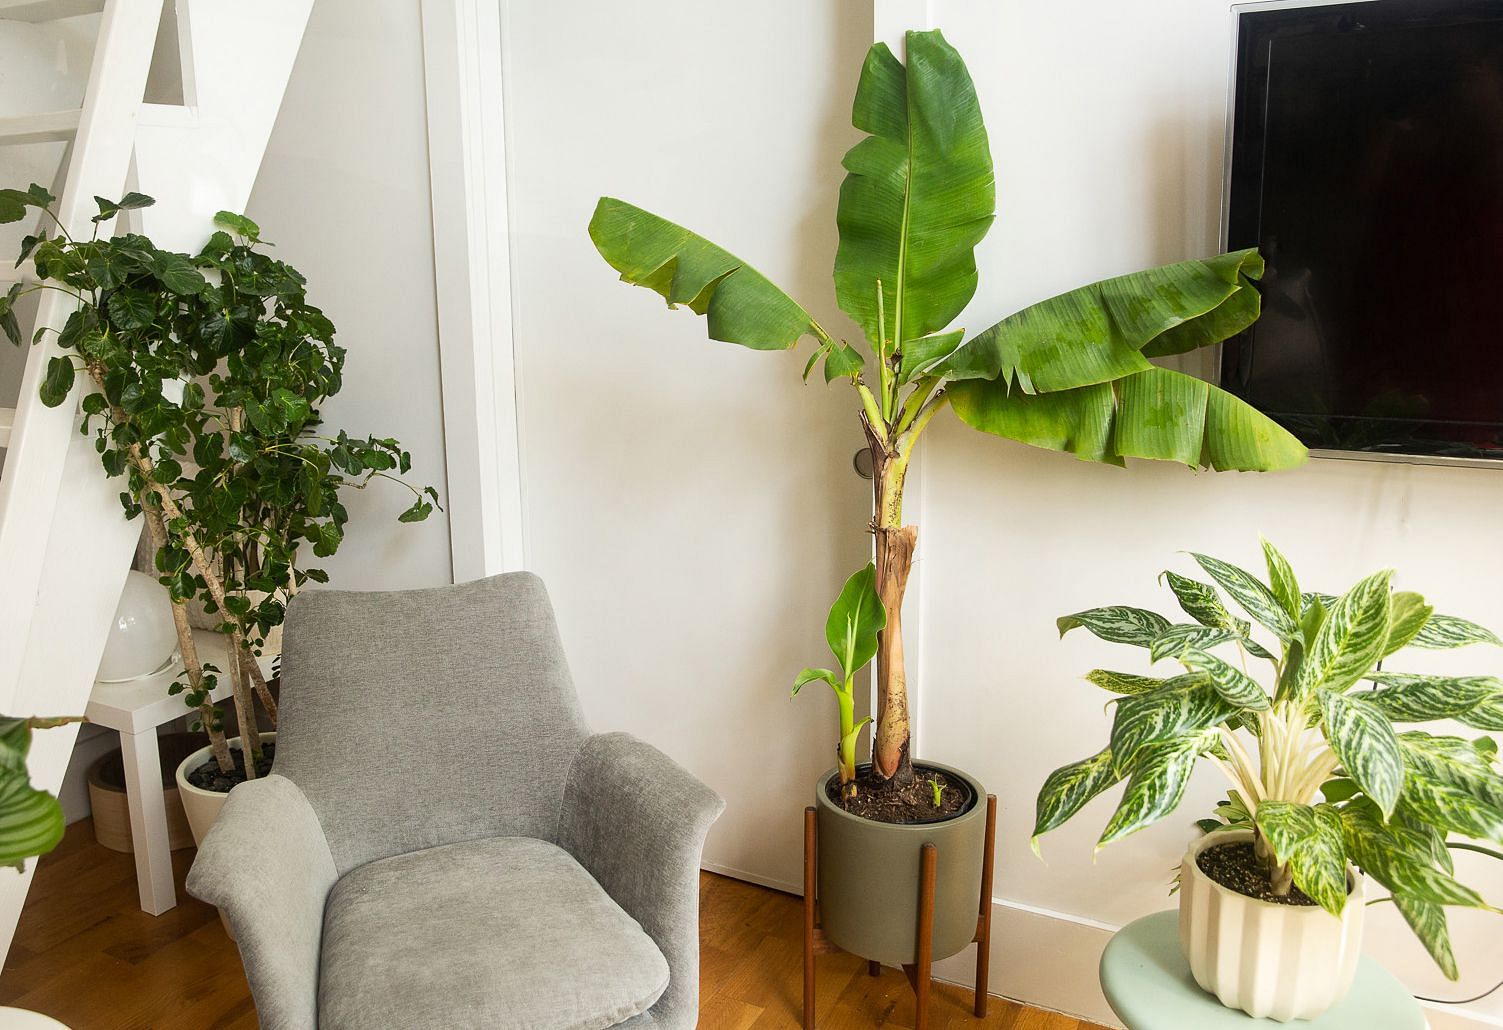 Astro tips 2022: Know if planting a banana tree in your house is auspicious or not